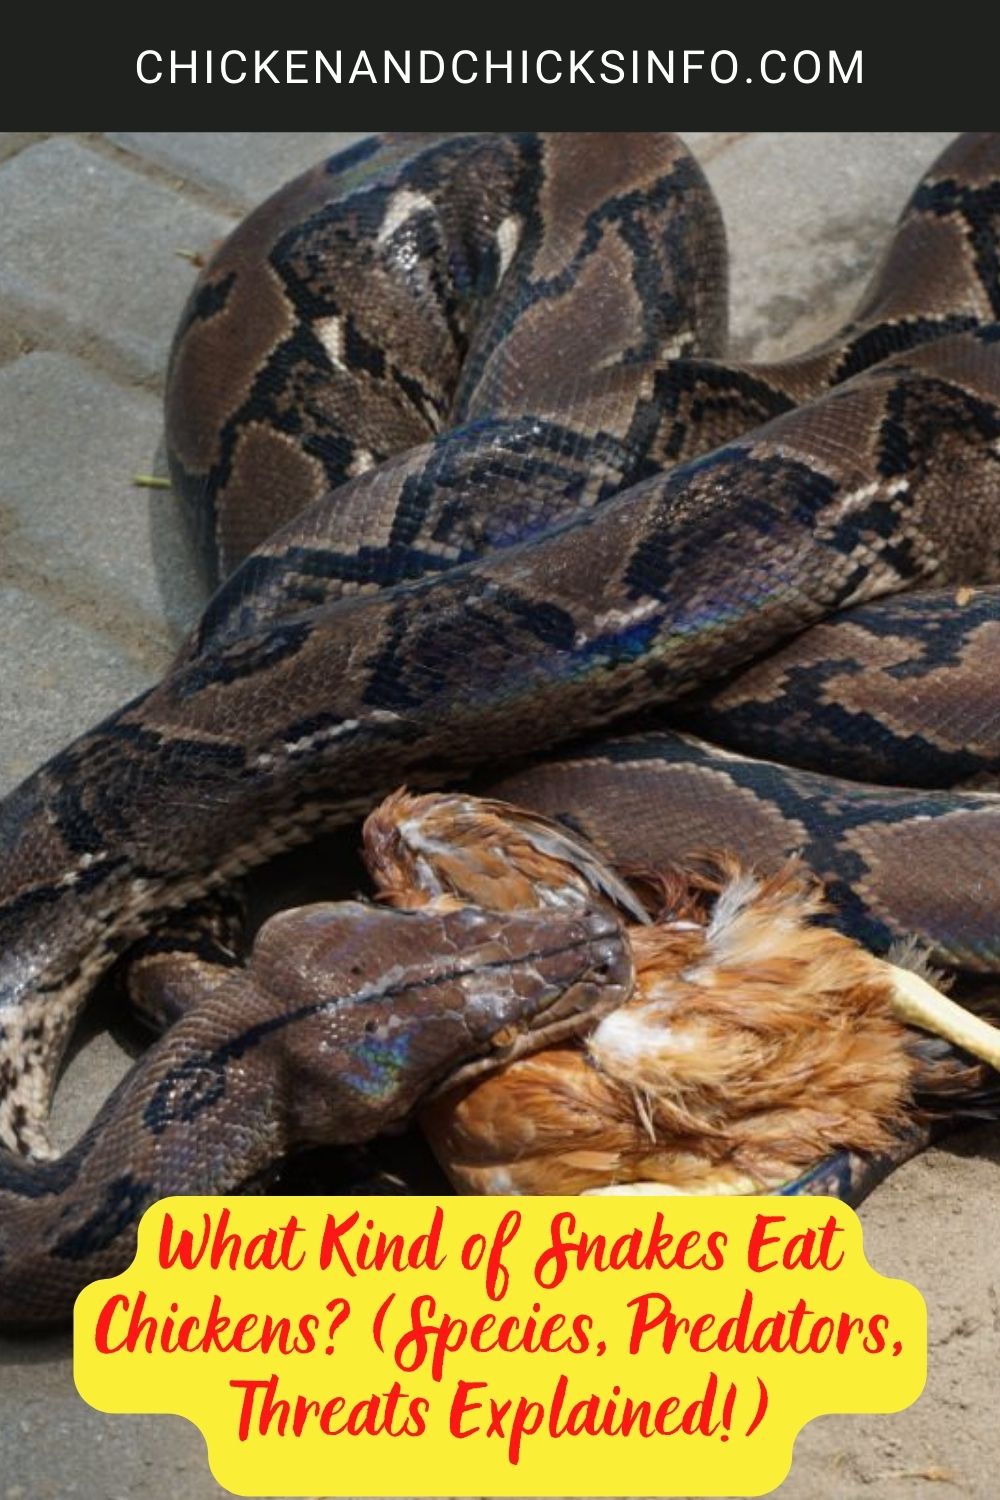 What Kind of Snakes Eat Chickens? (Species, Predators, Threats Explained!) poster.
